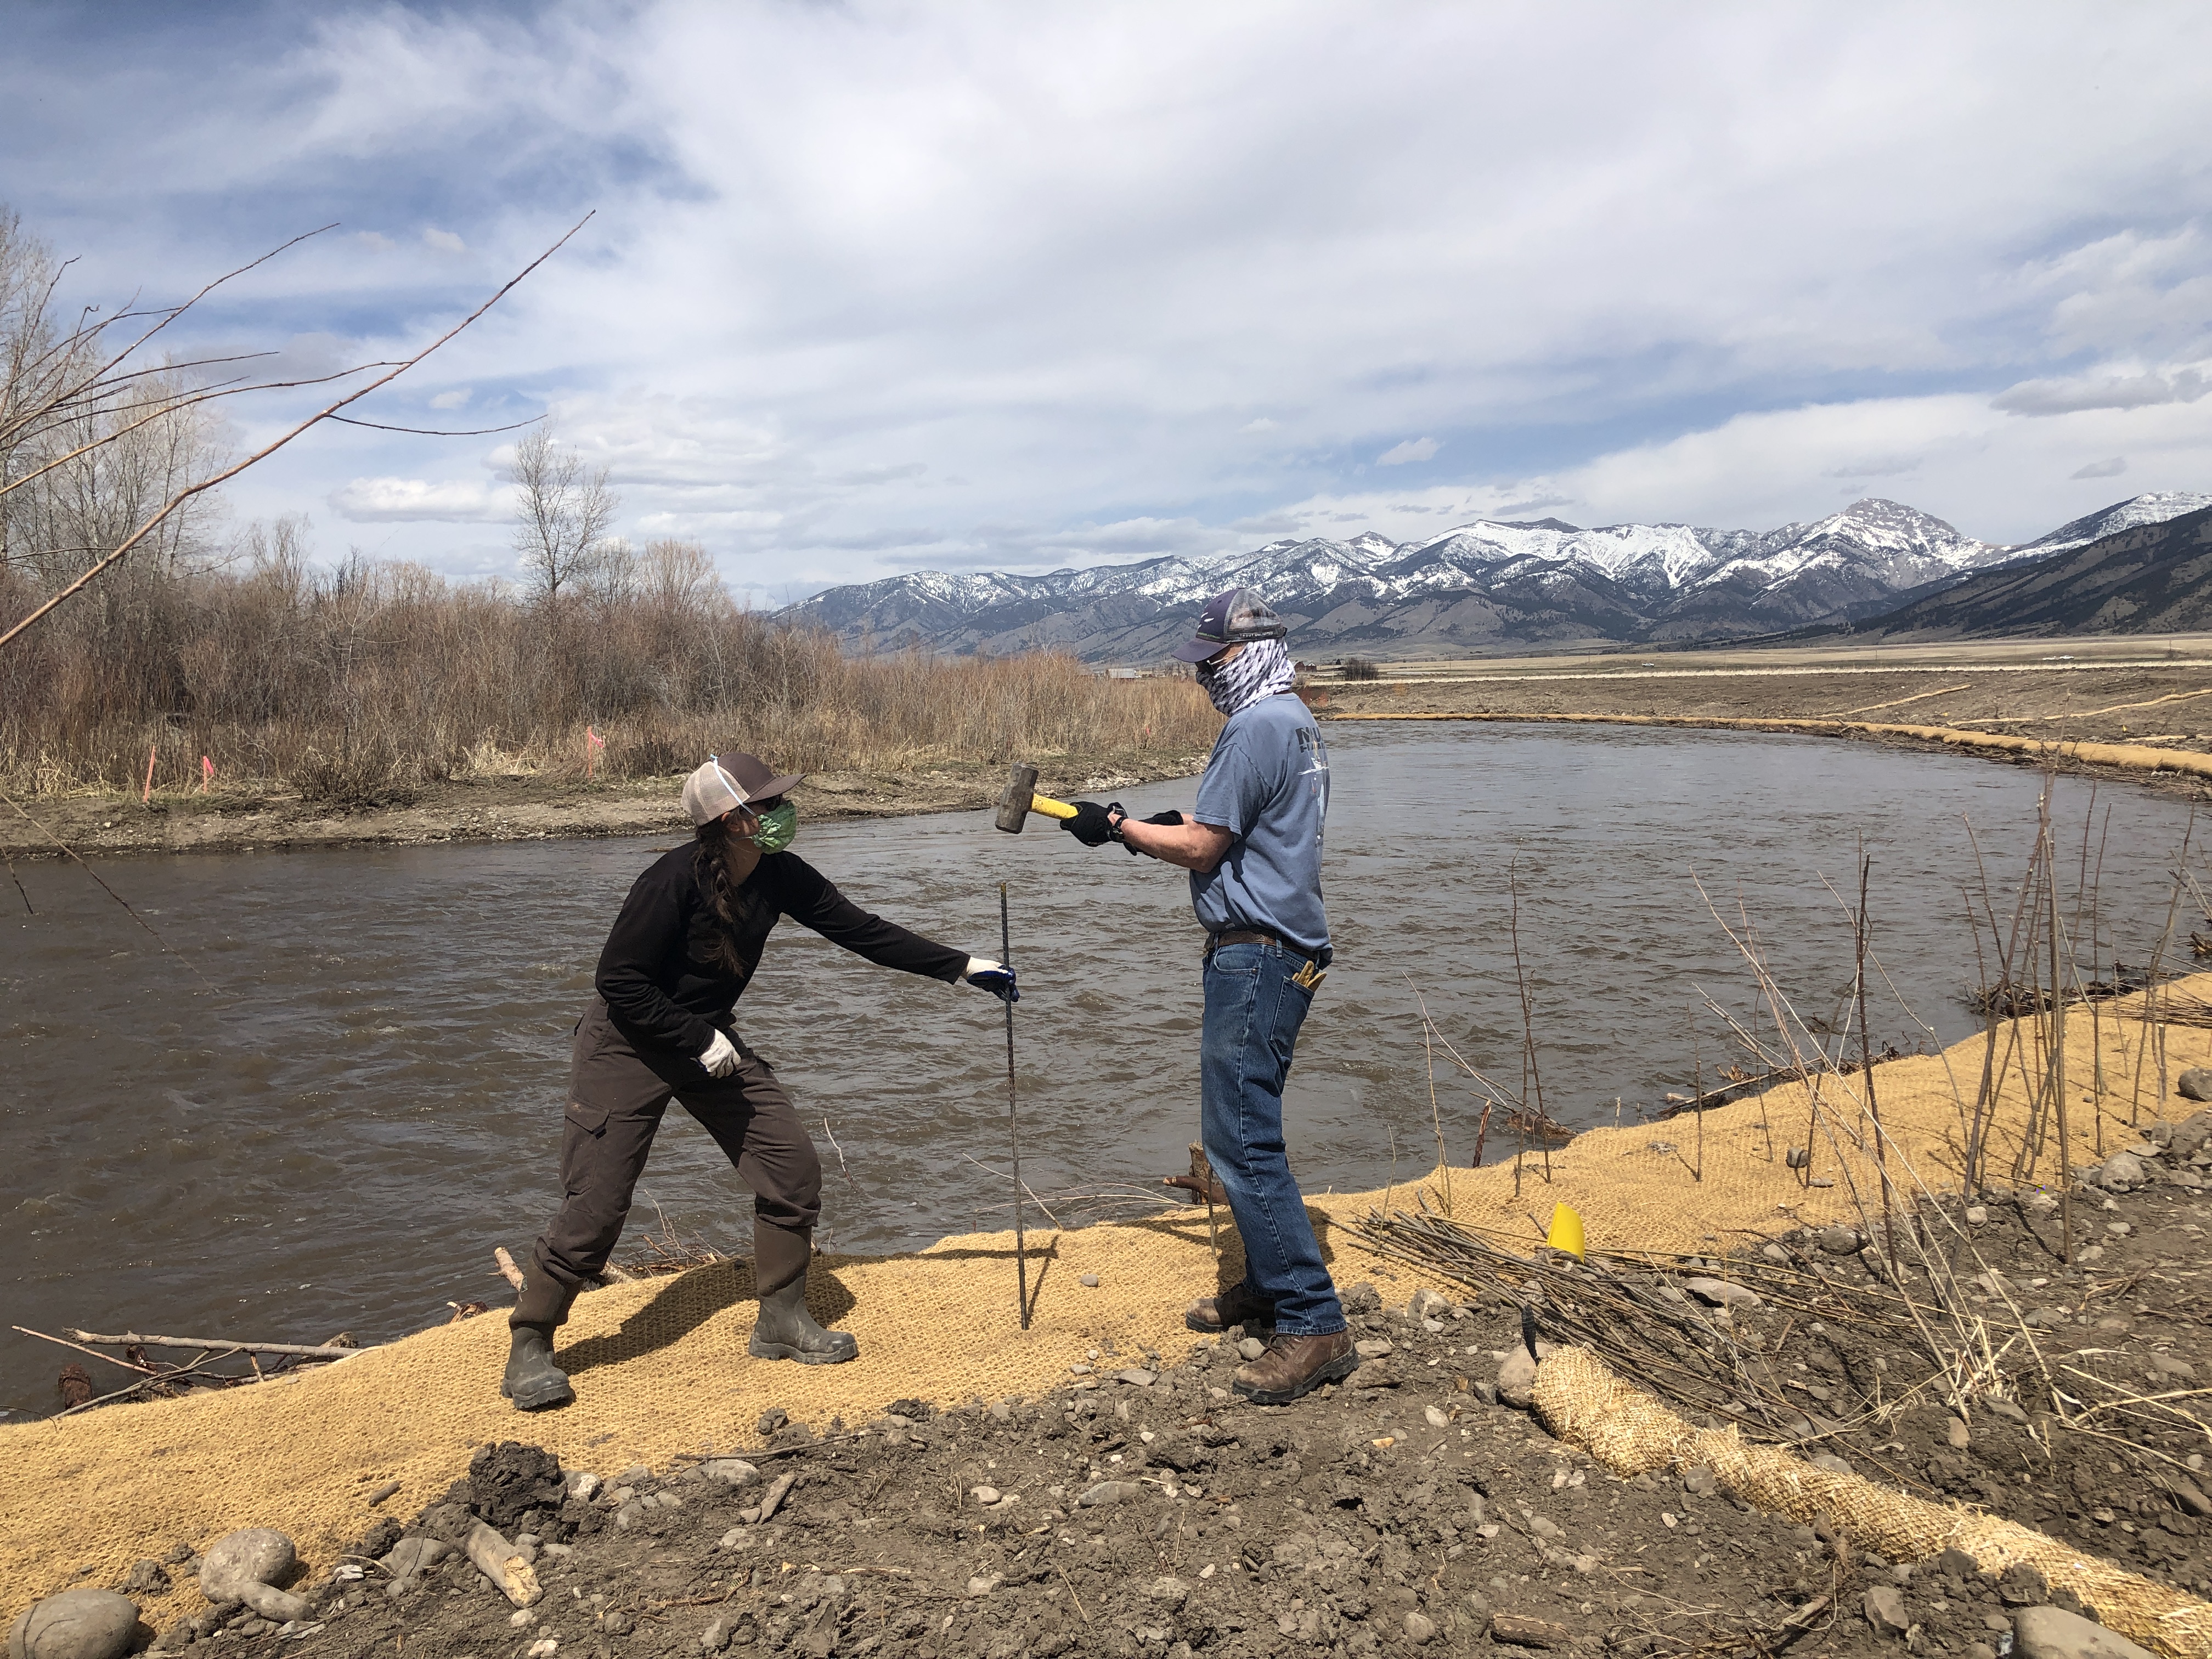 Planting bare root willows in the bank of the East Gallatin in Bozeman, Montana in April 2020.